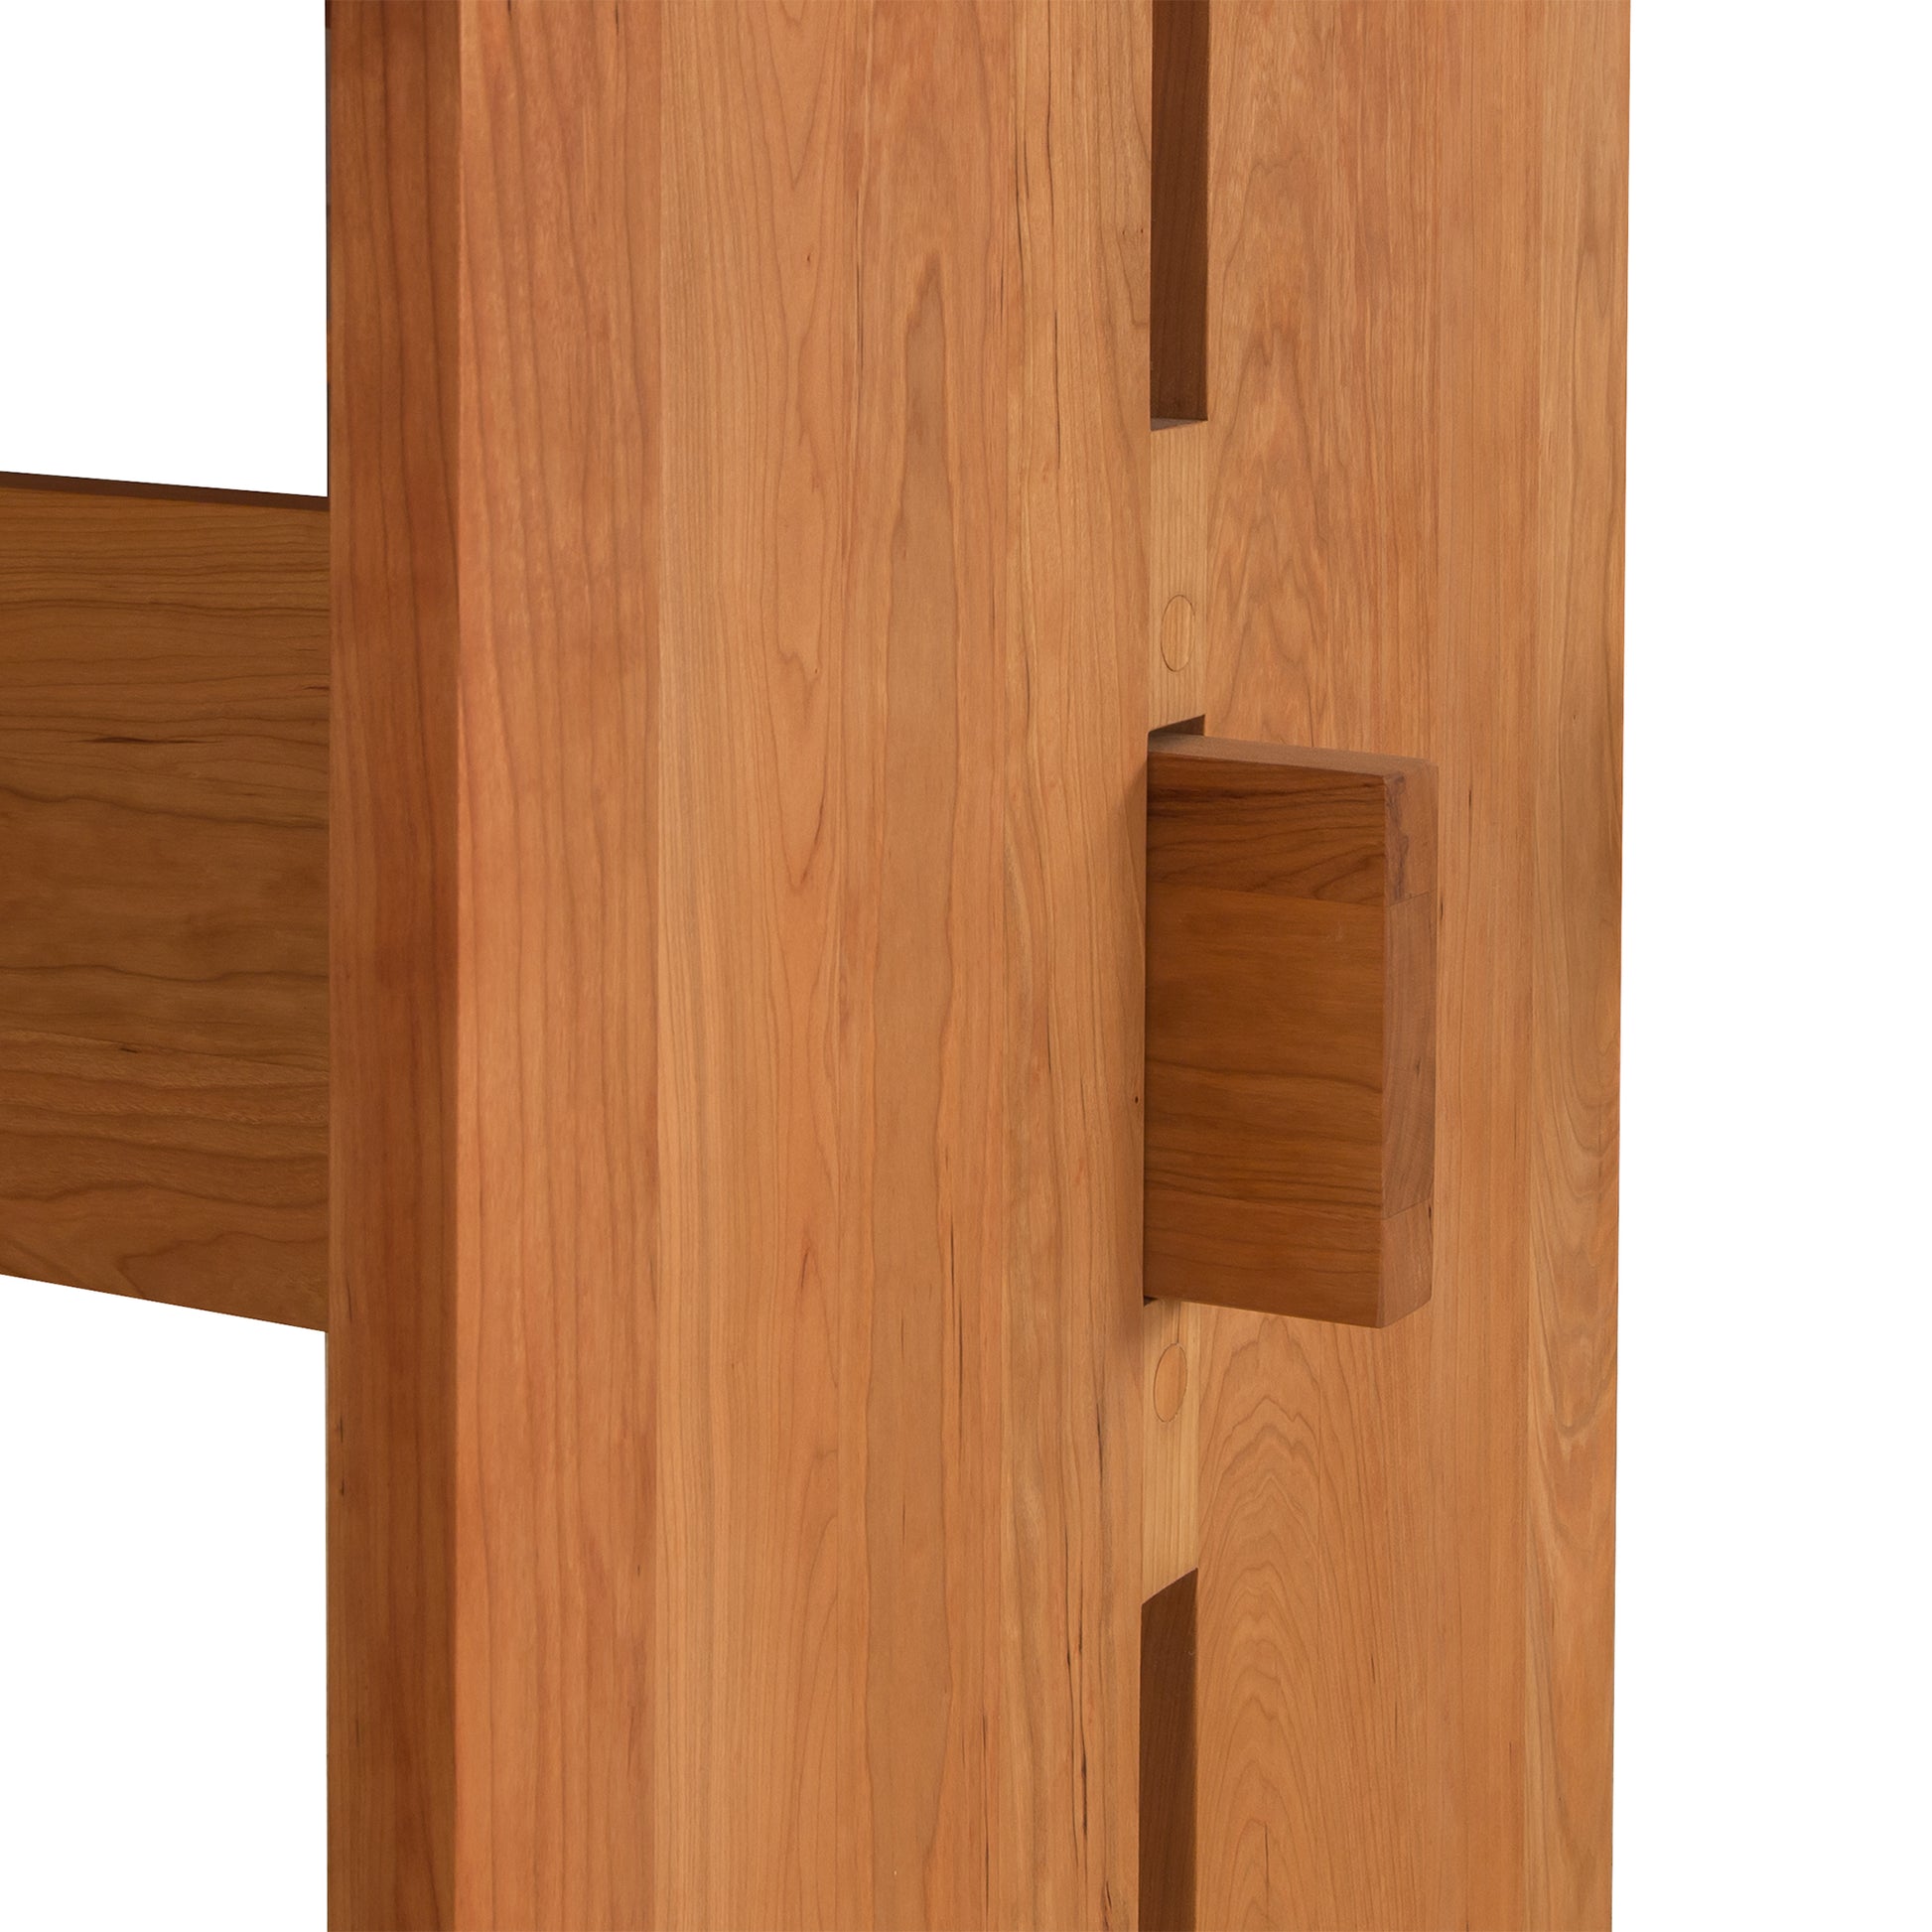 A close up image of a Modern American Dining Table from Vermont Furniture Designs.